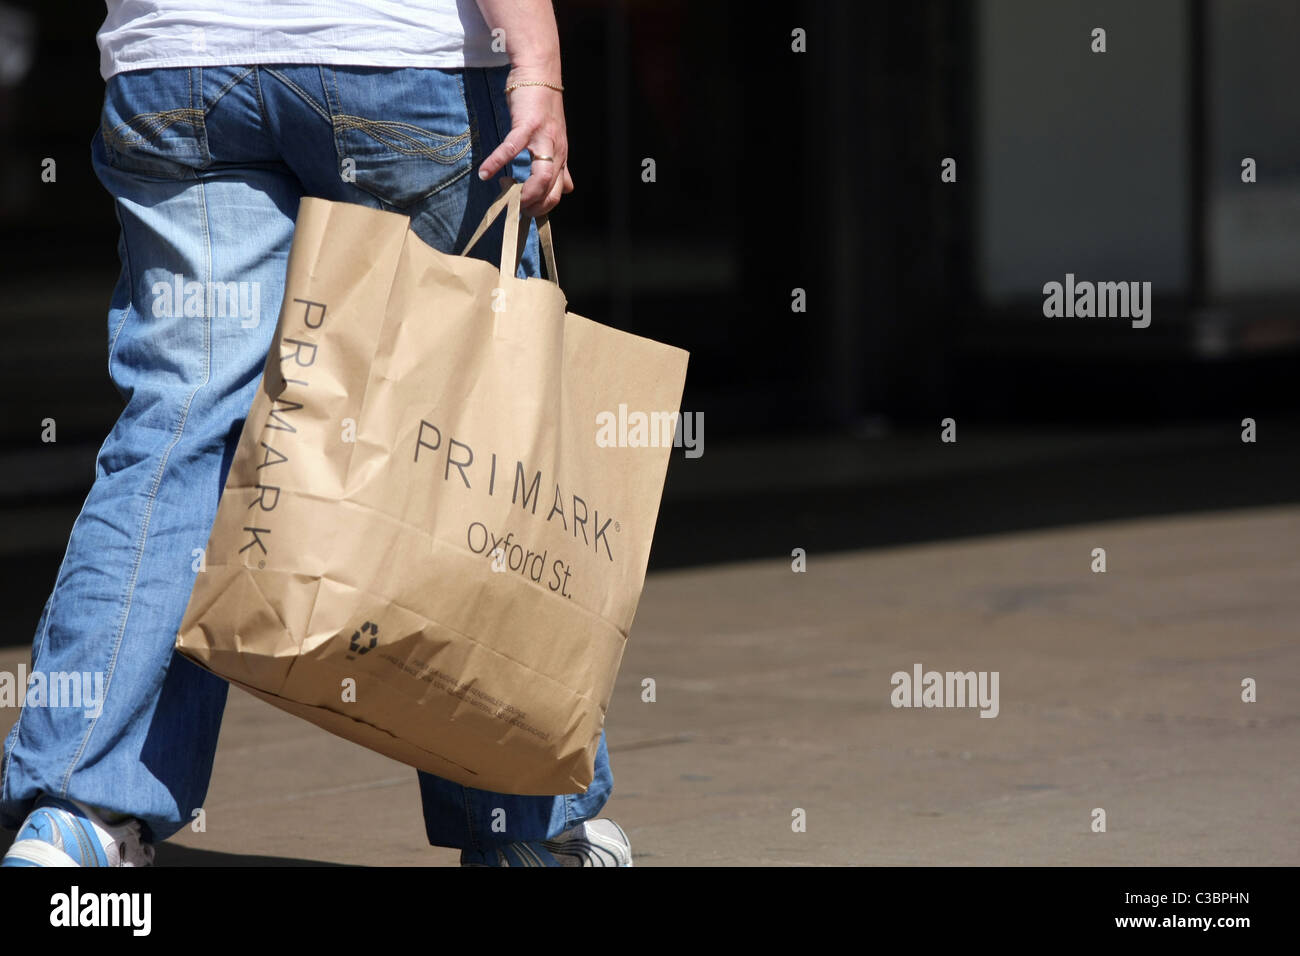 Part of a person carrying a Primark shopping bag in Oxford Street ...